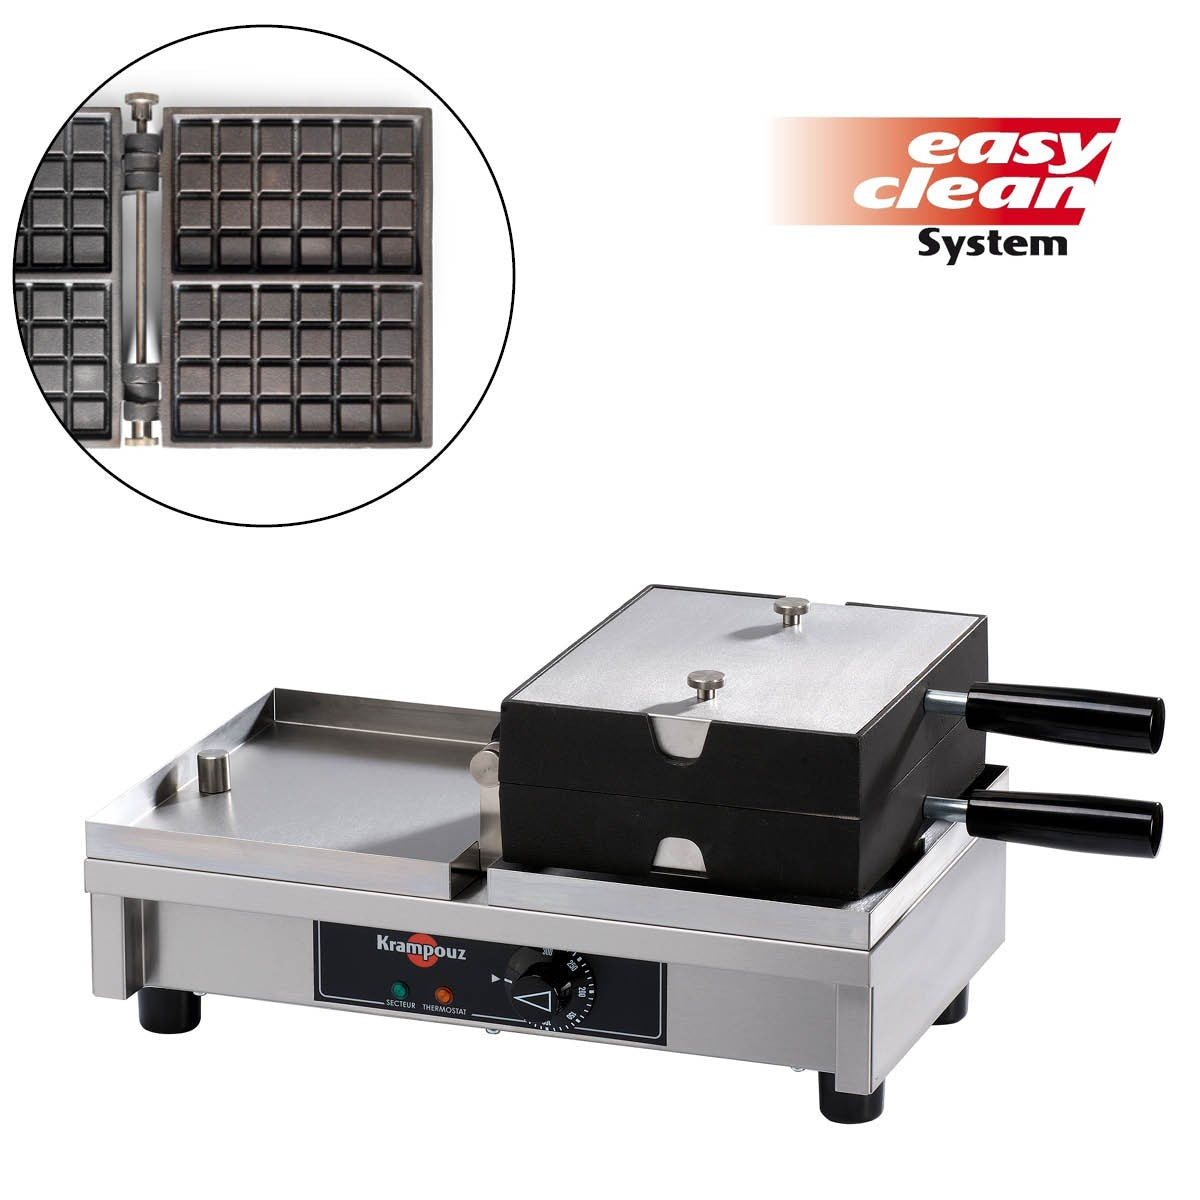 WECAJA - Single 4x6 FILLINGS 180' opening left to right Waffle maker NEW! Ideal for sweet and savory fillings. Krampouz